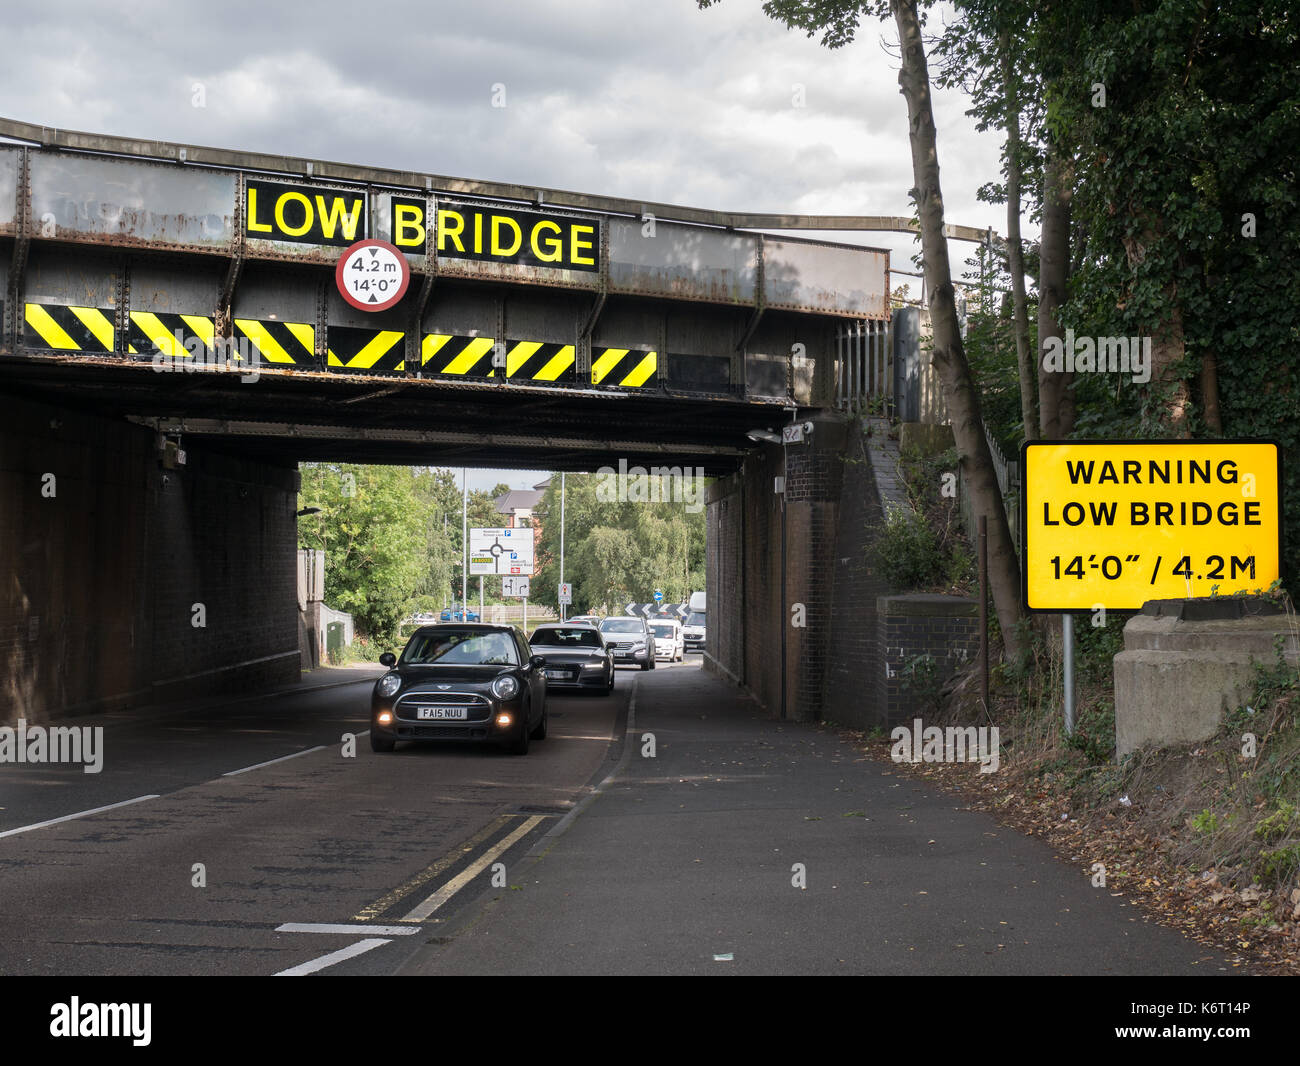 Warning about low railway bridge at lower (east) end of Rothwell road (Warren Hill), near the town centre, Kettering, England, september 2017. Stock Photo